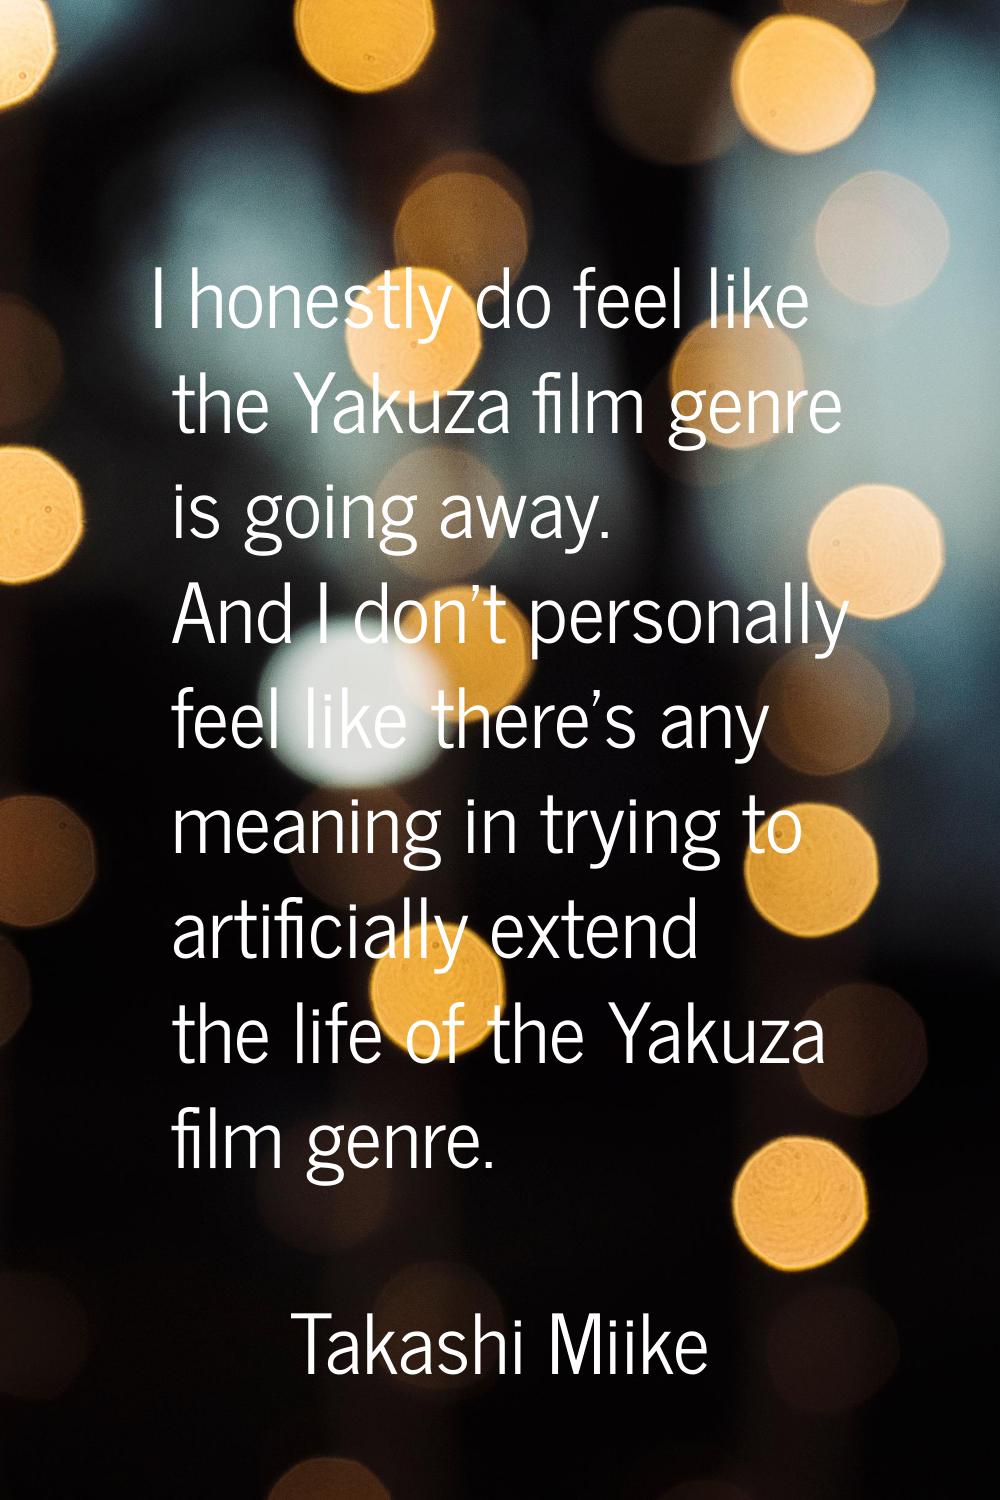 I honestly do feel like the Yakuza film genre is going away. And I don't personally feel like there